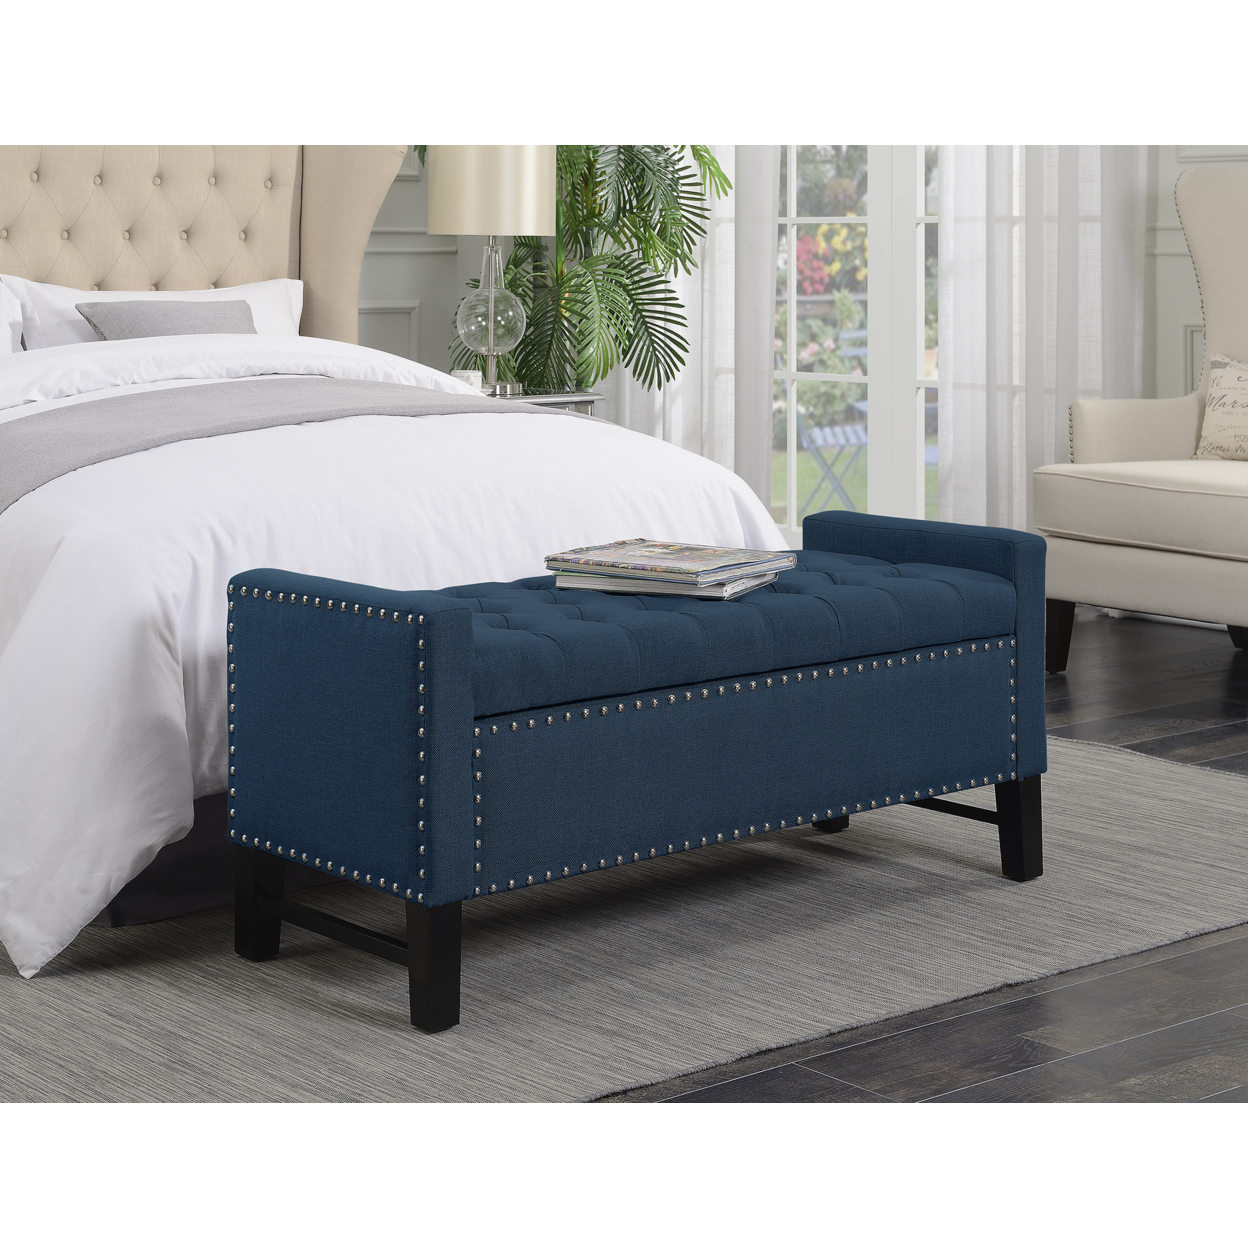 Michael Linen Modern Contemporary Button Tufted With Silver Nailheads Deco On Frame Storage Lid Bench - Teal